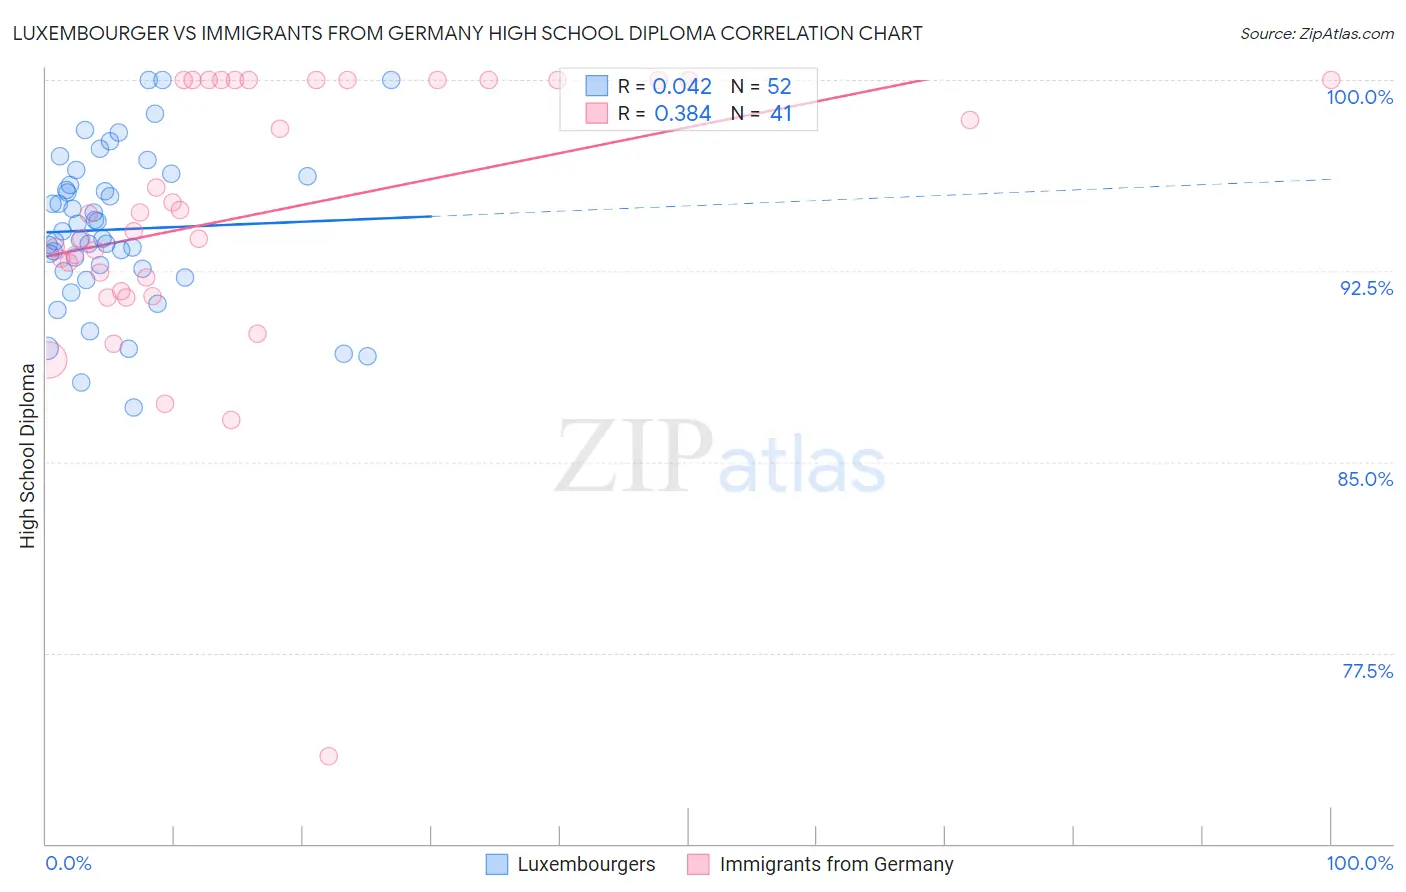 Luxembourger vs Immigrants from Germany High School Diploma